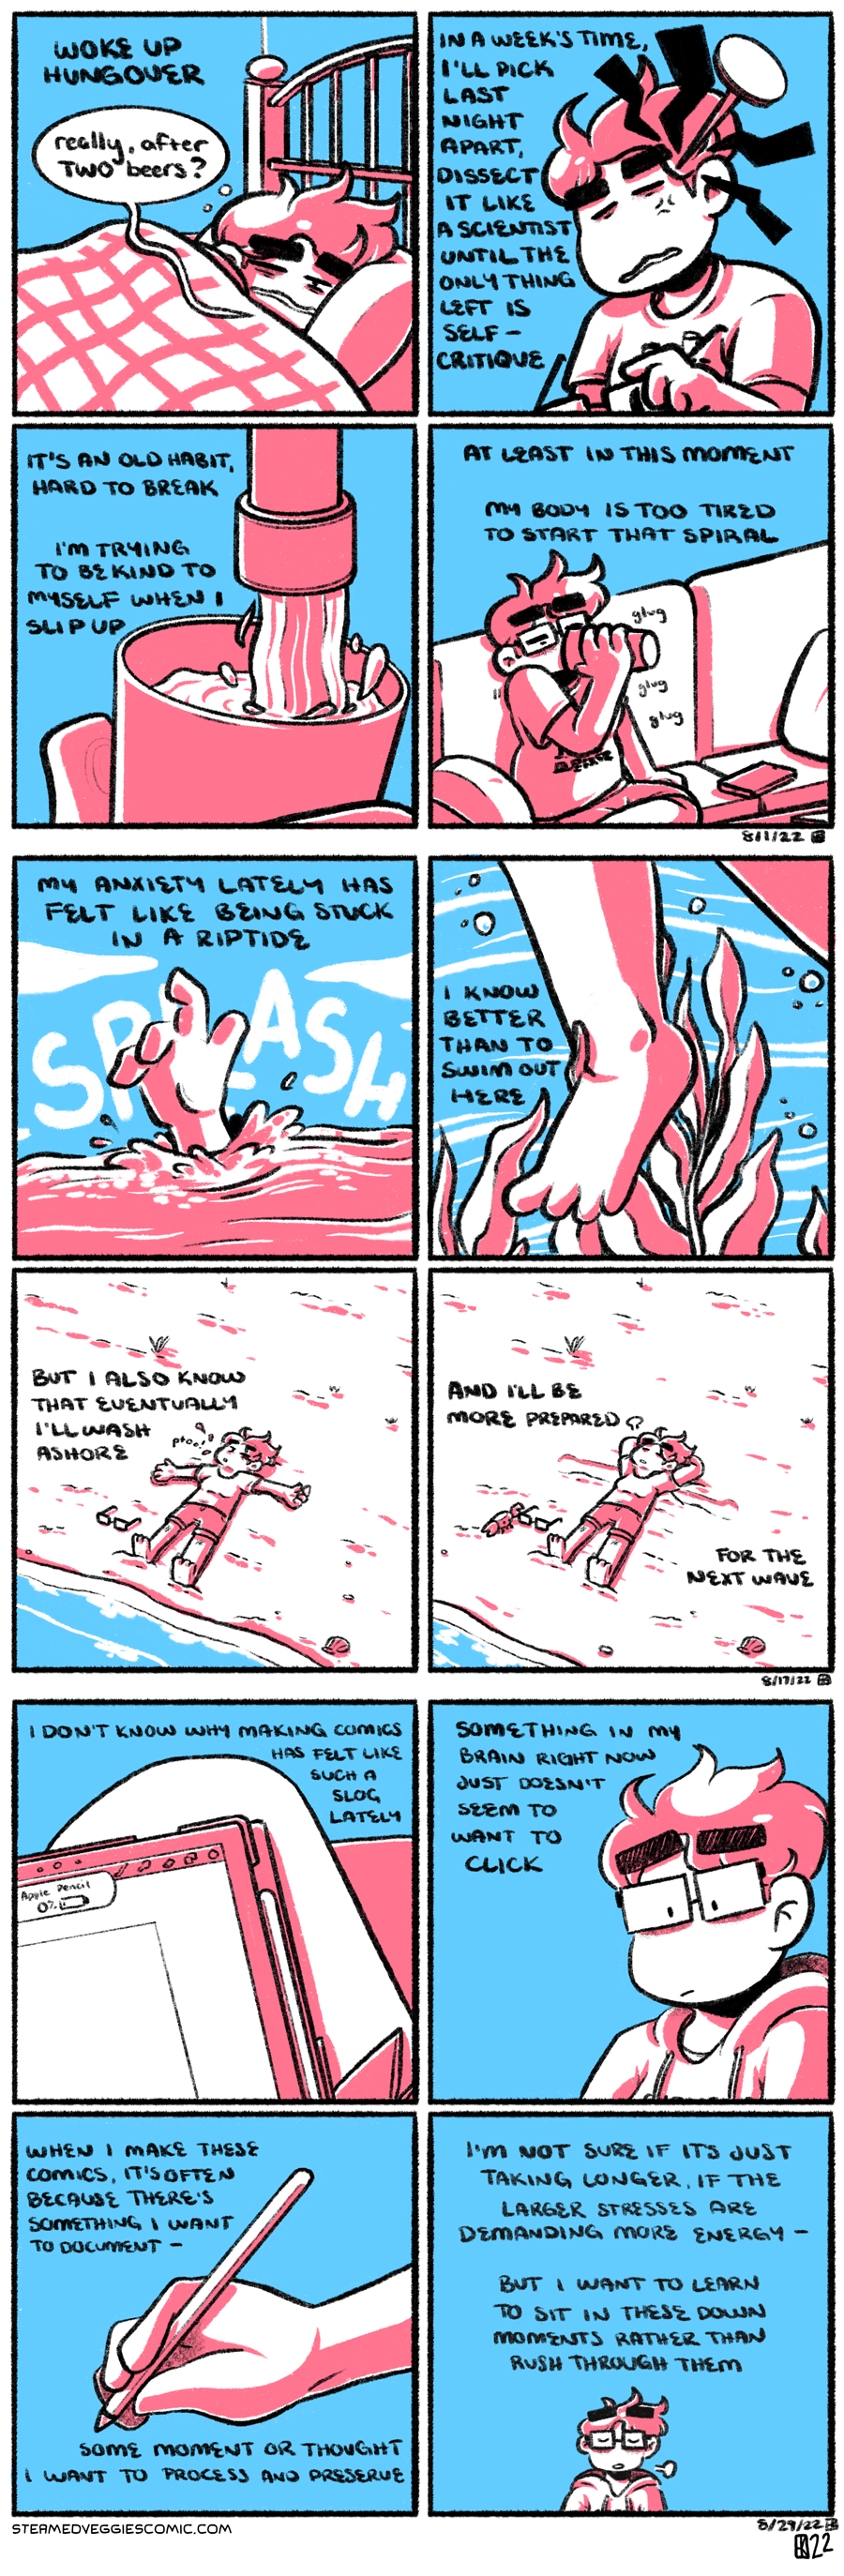 A series of three four-panel comics, rendered in pink and blue.

The first comic: The first panel shows Emily curled up in a bed, blearly opening her eyes. The narration beings "Woke up hungover." Emily quips, "really, after TWO beers?" In the second panel, Emily is sitting up, her glasses in her hand, leaning her head to the side with her eyes closed tight. A giant nail is poised right above her temple. The narration continues, "in a week's time, I'll pick last night apart, dissect it like a scientist until the only thing left is self-critique." In the third panel, a hand holds a glass under a faucet, filling it up with water. "It's an old habit, hard to break," the narration goes on, "I'm trying to be kind to myself when I slip up." In the fourth panel, Emily sits on the couch, glasses on but still in her pajamas, greedily drinking from the glass of water. "At least in this moment, my body is too tired to start that spiral," the narration concludes.

The second comic: In the first panel, a hand sticks out from turbulent waters with a splash, reaching for help. The narration begins, “my anxiety lately has felt like being stuck in a riptide.” In the second panel, a leg is seen kicking around underwater, the current strong, seaweed wrapping around it. “I know better than to swim out here,” the narration continues. In the third panel, a figure—Emily, a woman with short hair in a T-shirt and shorts—lies spread out on a beach, her glasses tossed to her side. “But I also know that eventually I’ll wash ashore,” the narration adds. In the fourth panel, Emily remains laying on the beach, the waves slowly rolling out. She crosses her arms behind her head and lets out a sigh. A small crab has appeared as well, curiously poking her glasses. “And I’ll be more prepared for the next wave,” the narration concludes.

The third comic: In the first panel, an iPad with a charging Apple Pencil rests on a crossed leg. "I don't know why making comics has felt like such a slog lately," the narration begins. In the second panel, Emily sits on the right of the panel, looking down at the iPad on her lap, now offscreen. "Something in my brain right now just doesn't seem to want to click," she continues. In the third panel, her hand holds the Apple Pencil, reaching out. "When I make these comics, it's often because there's something I want to document, some moment or thought I want to process and preserve," the narration reads. In the fourth panel, Emily sits, eyes closed, and takes a deep breath, a sigh escaping from her. "I'm not sure if it's just taking longer, if the larger stresses are demanding more energy, but I want to learn to sit in these down moments rather than rush through them," the narration concludes.